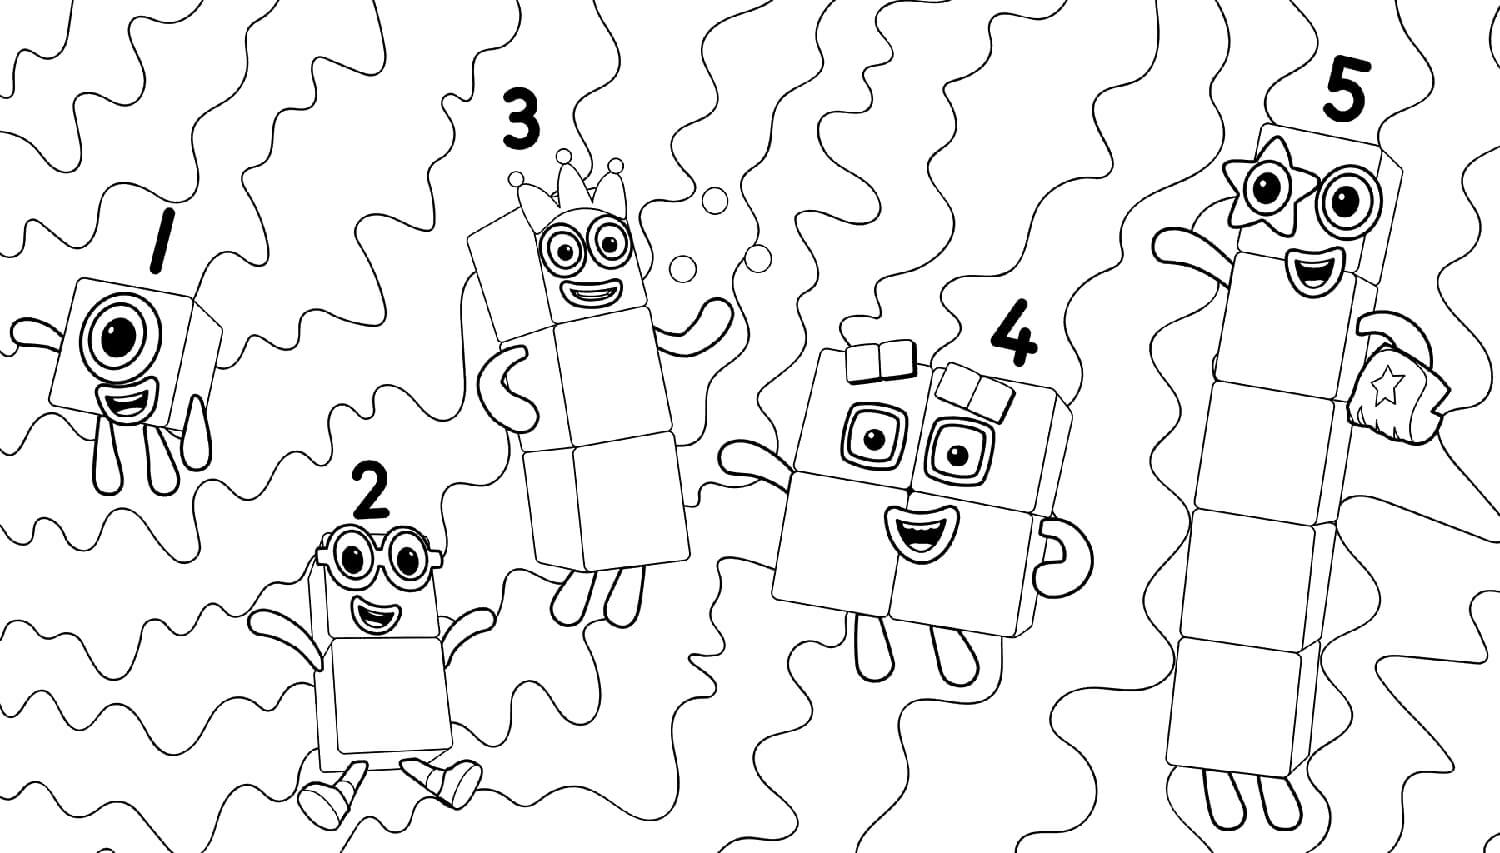 Numberblocks from 1 to 5 Coloring Page - Free Printable Coloring Pages for  Kids